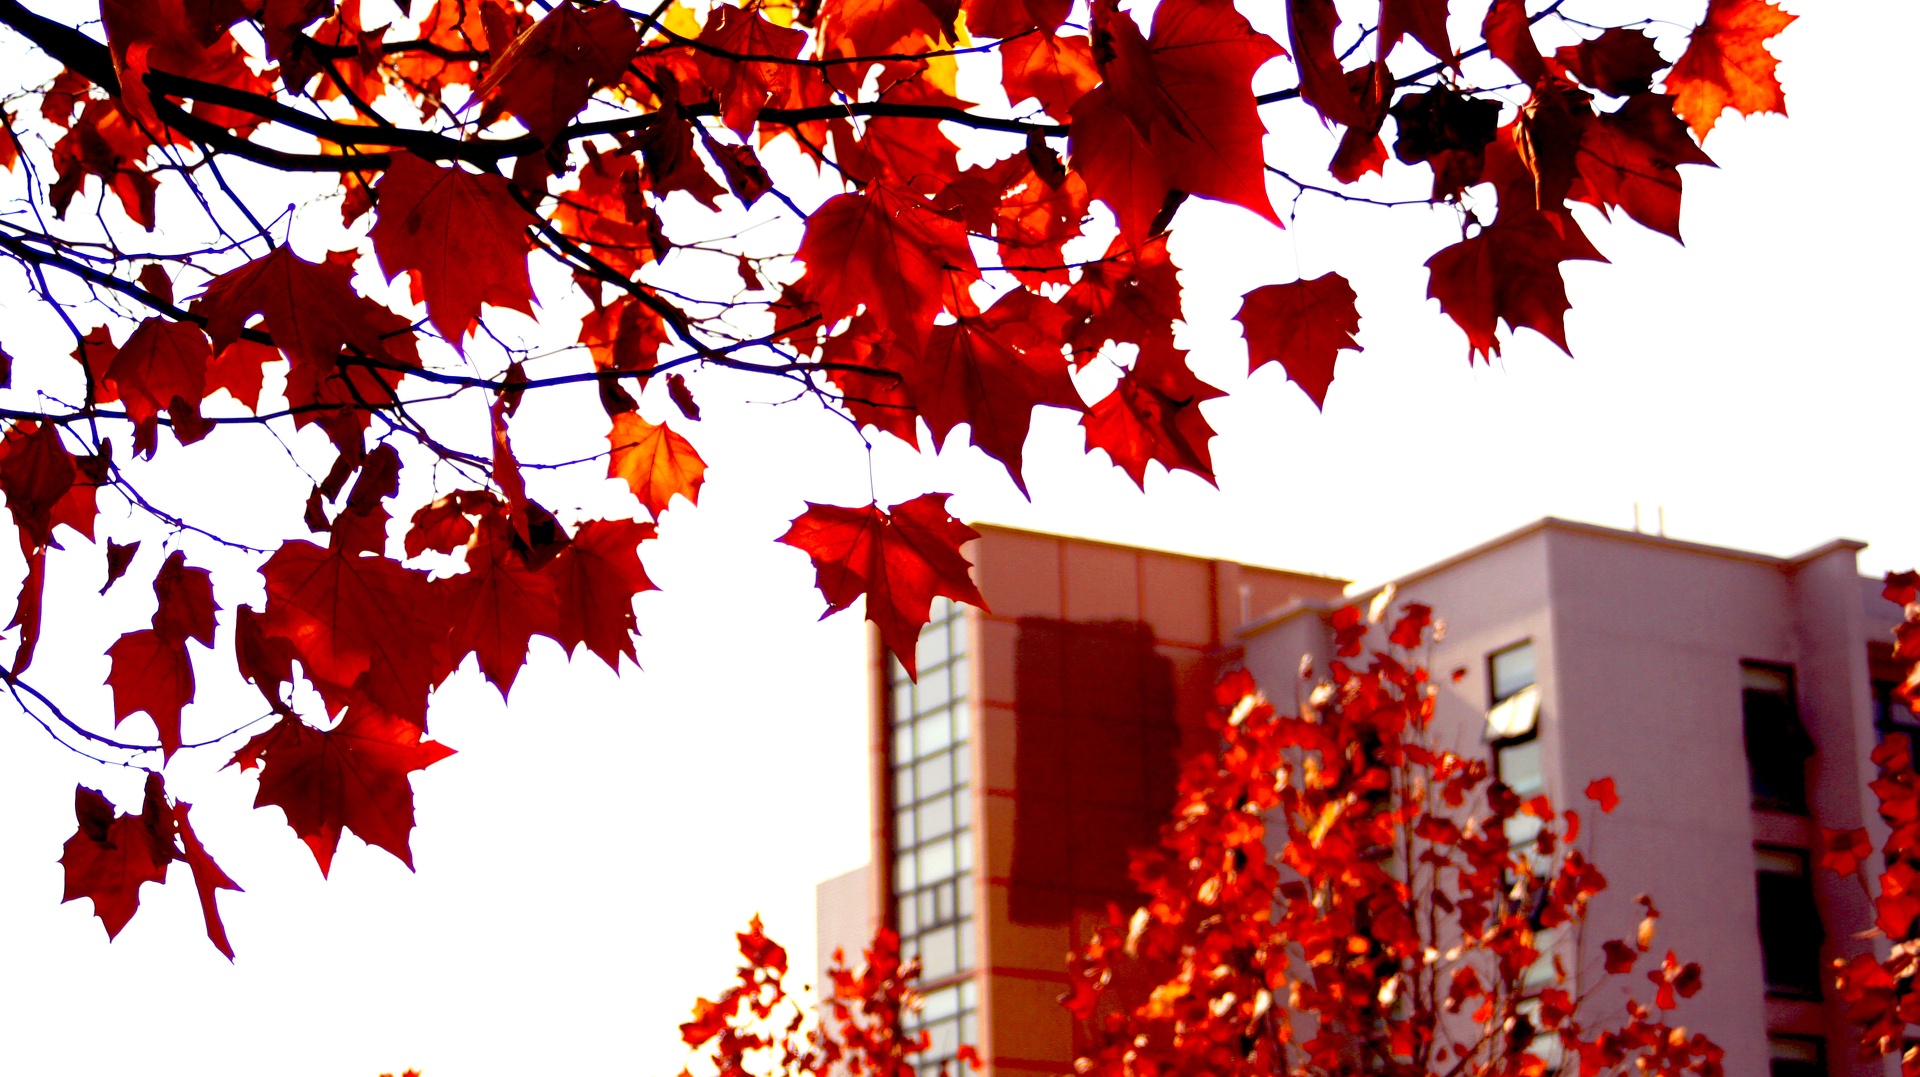 Autumn_maples_in_Wuhan_University_of_Technology_Wuhan_China_20171210.jpg